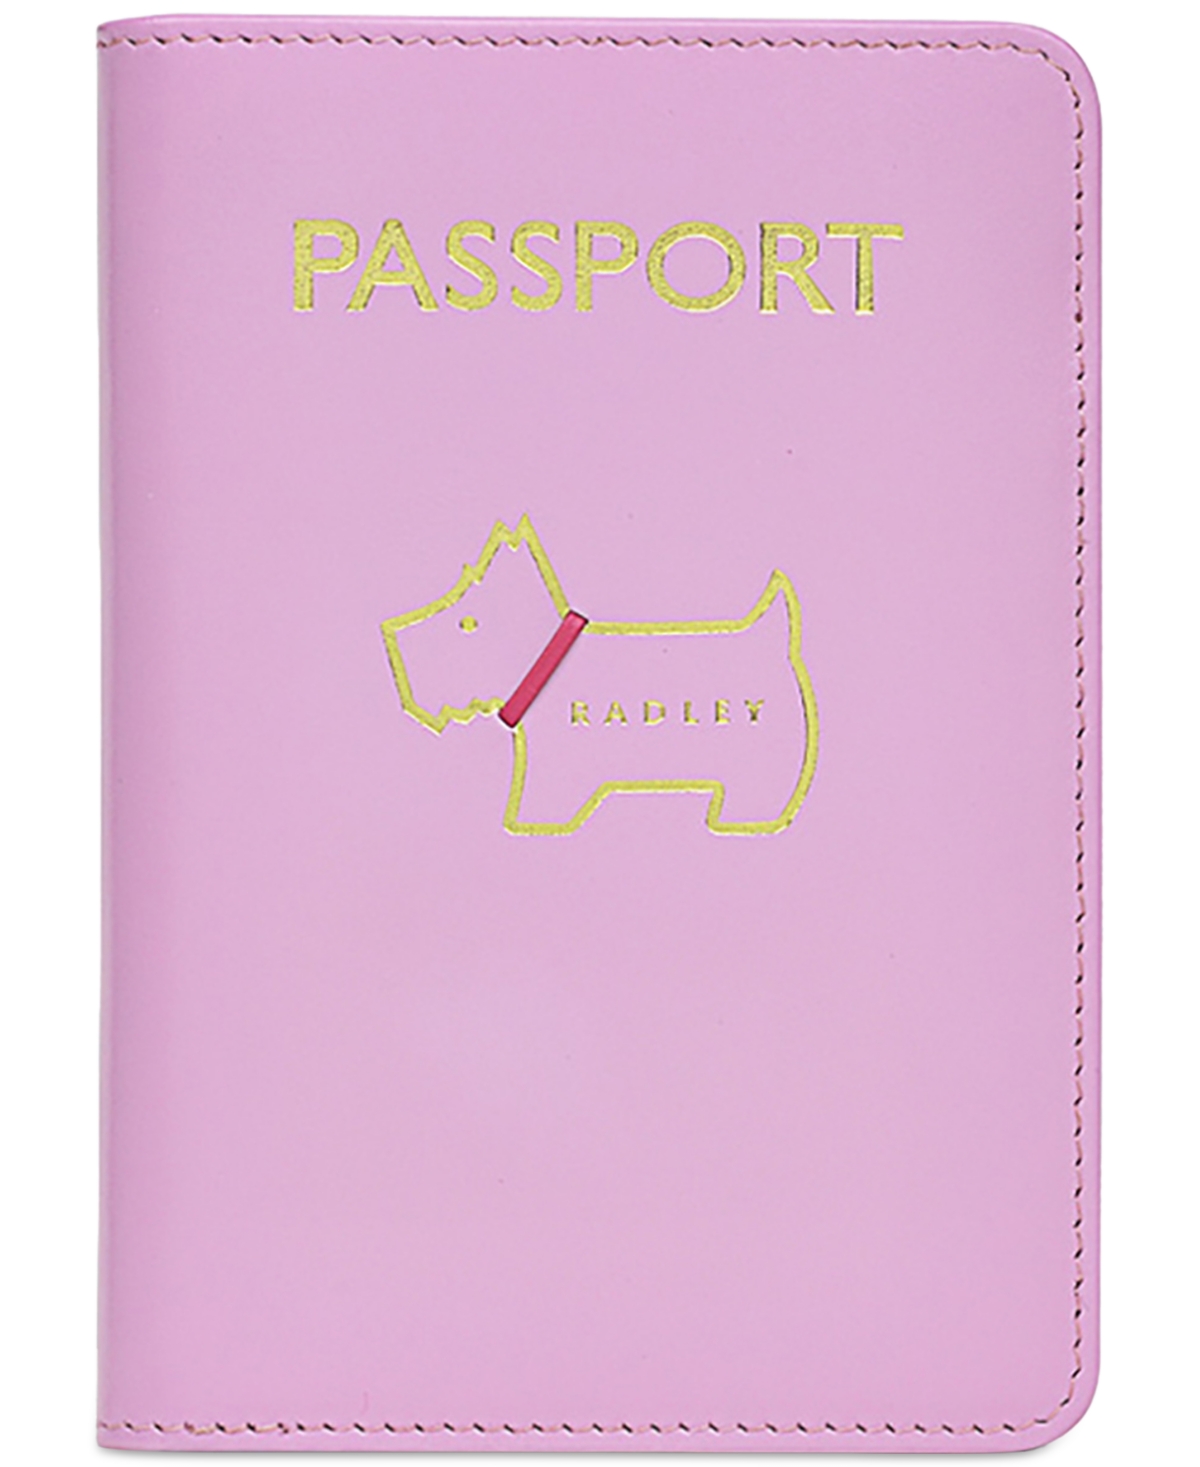 Heritage Dog Outline Leather Passport Cover - Cloud Burs